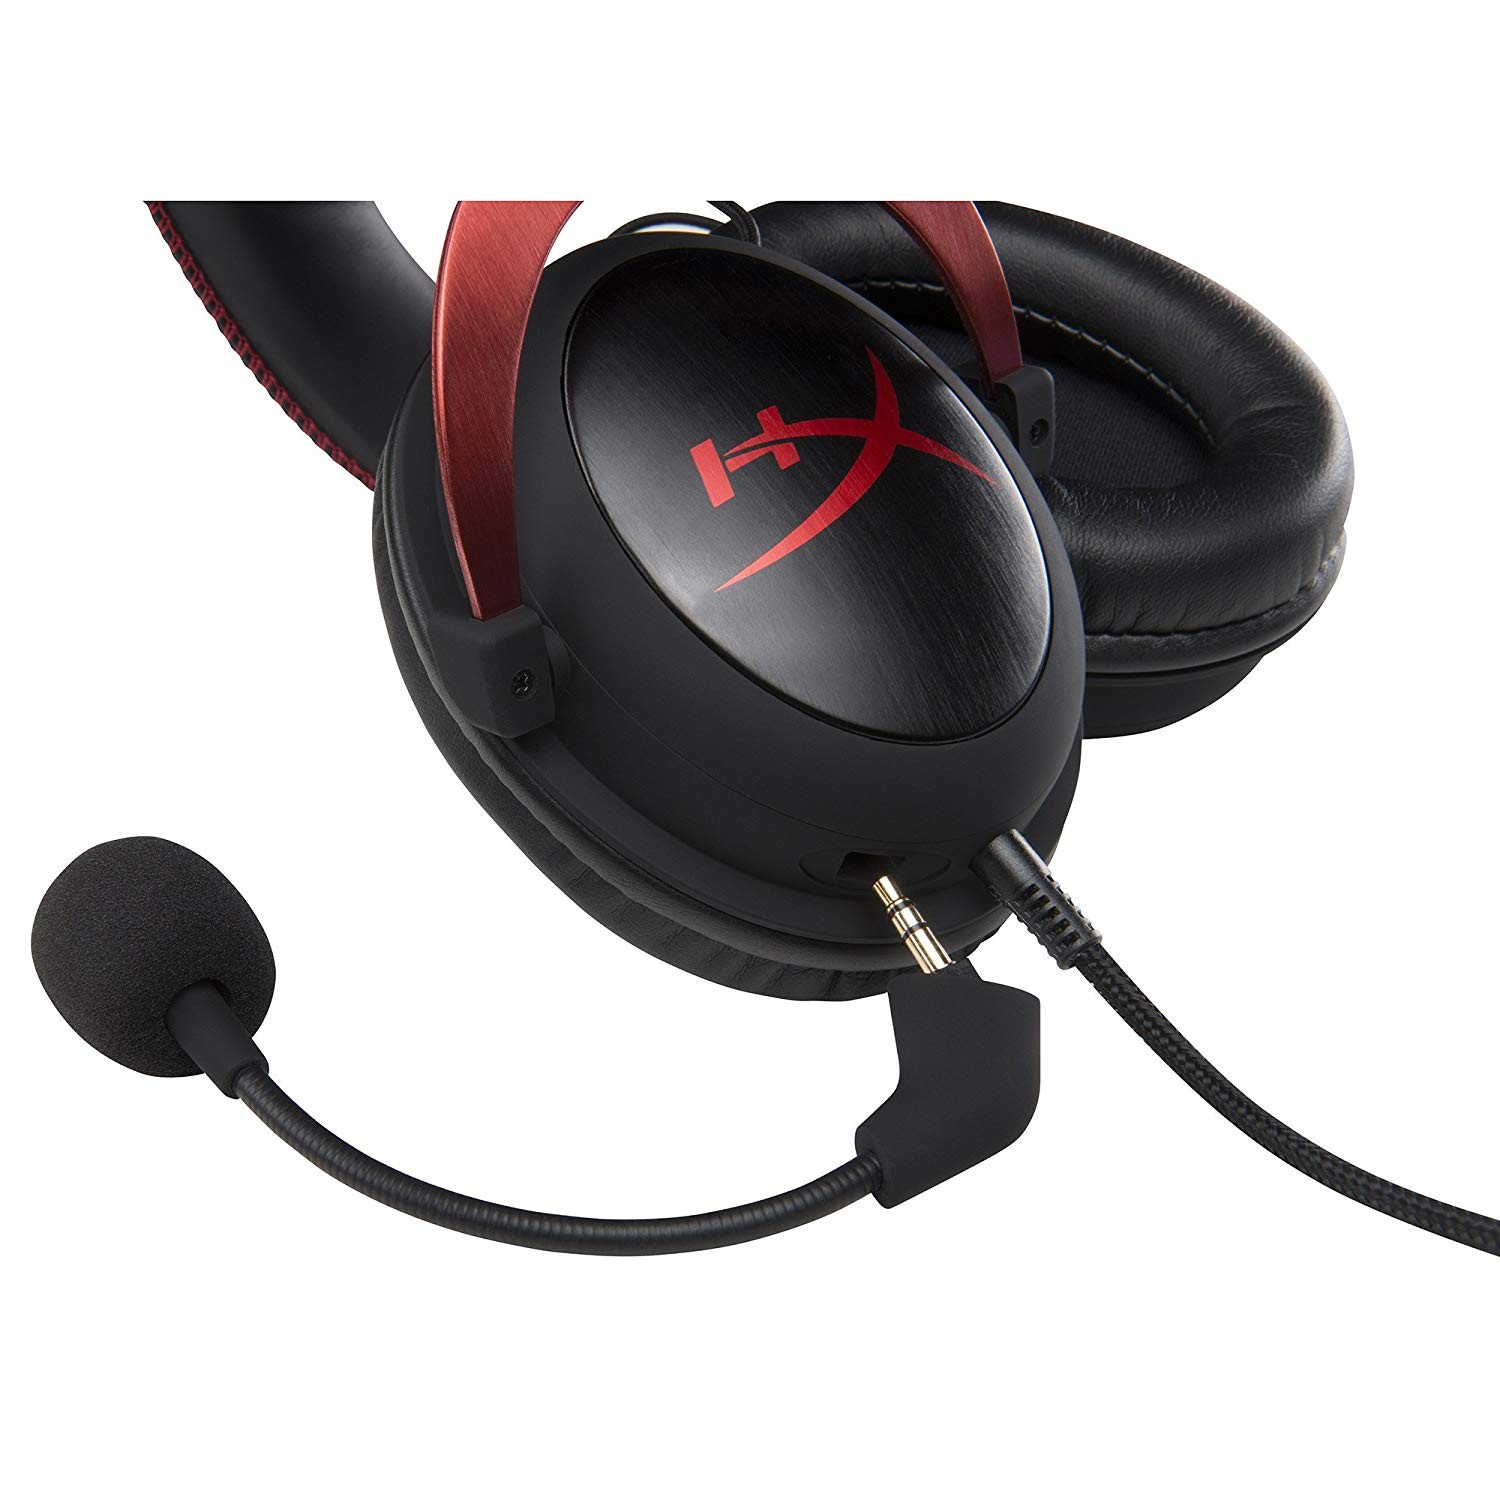 HyperX Cloud II Red Gaming Headset - 7.1 Surround Sound